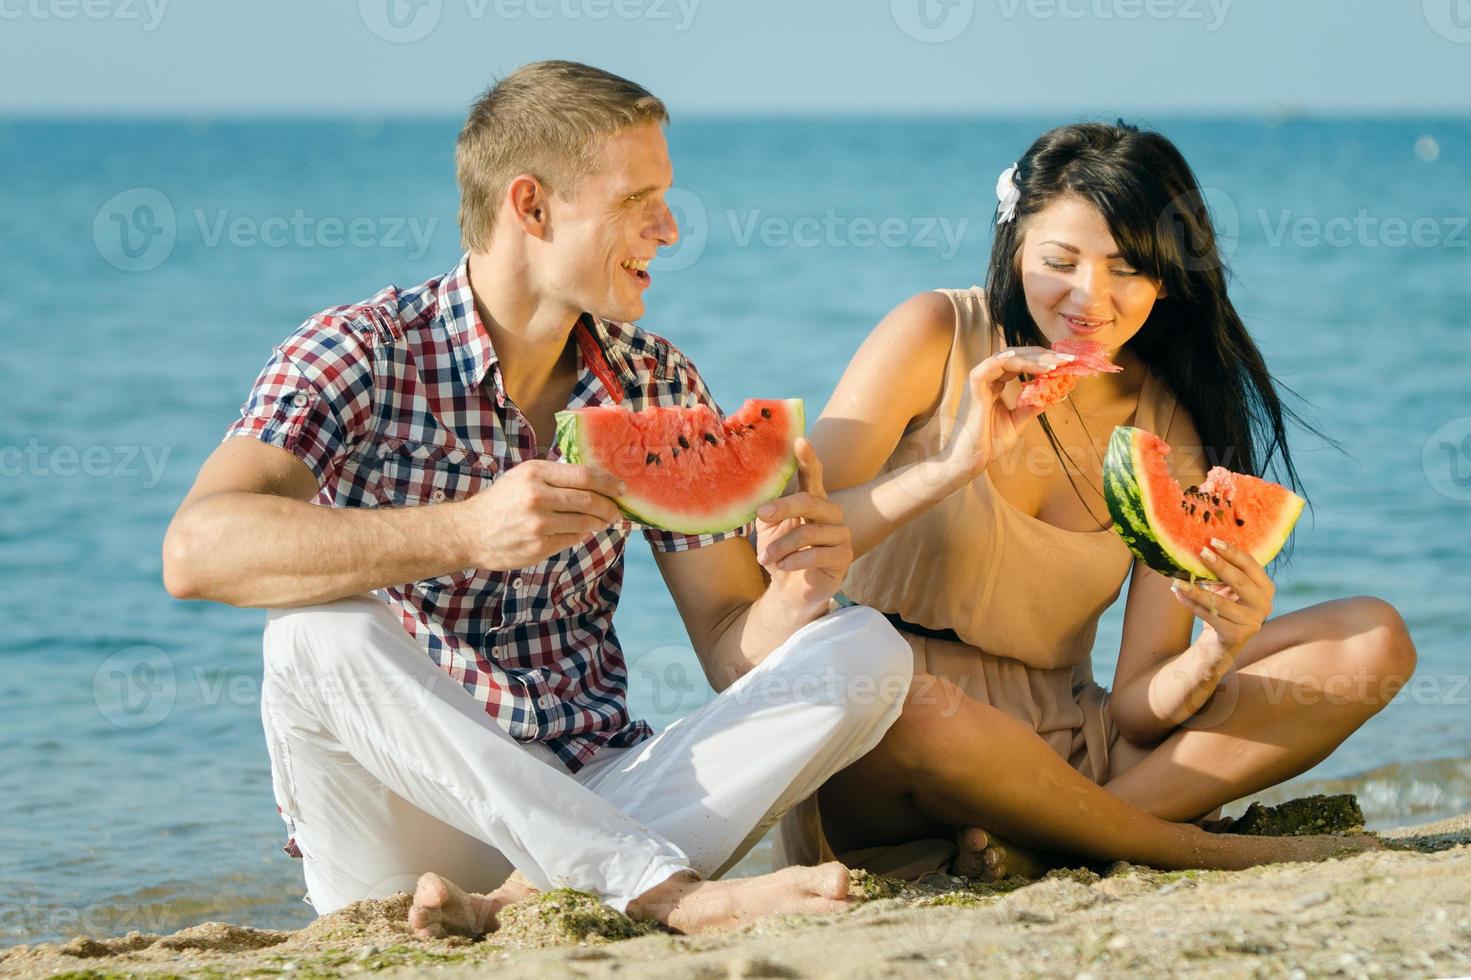 guy and a girl on the seashore eating a ripe watermelon photo